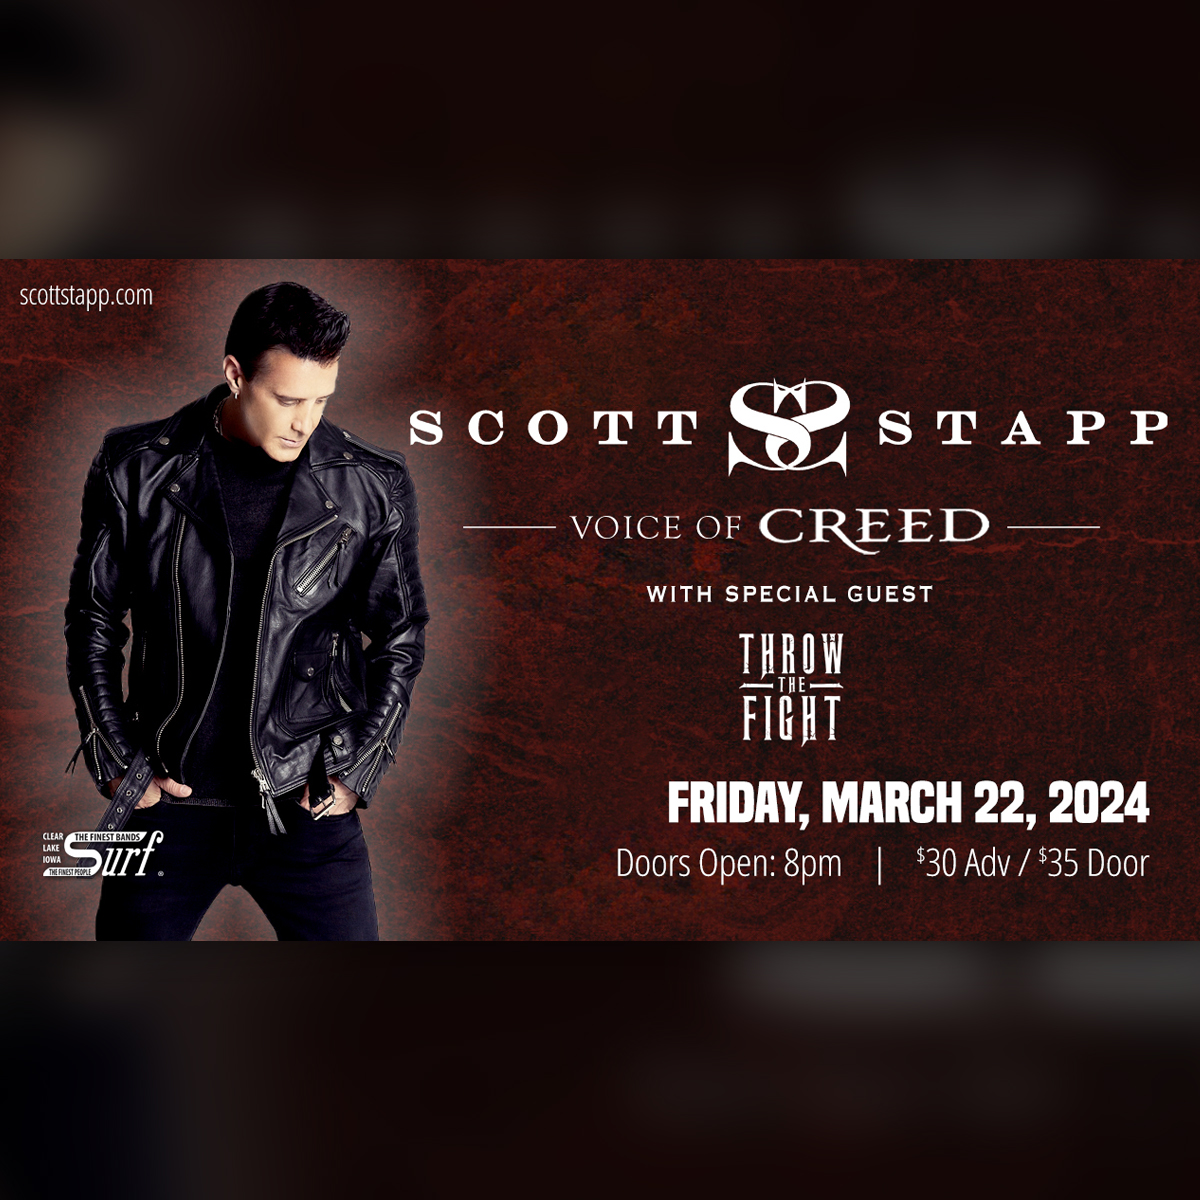 We're in Clear Lake, IA, TONIGHT at The @surfballroom supporting @scottstapp! 🔥 🤘

🎟️ Tickets at: surfballroom.com